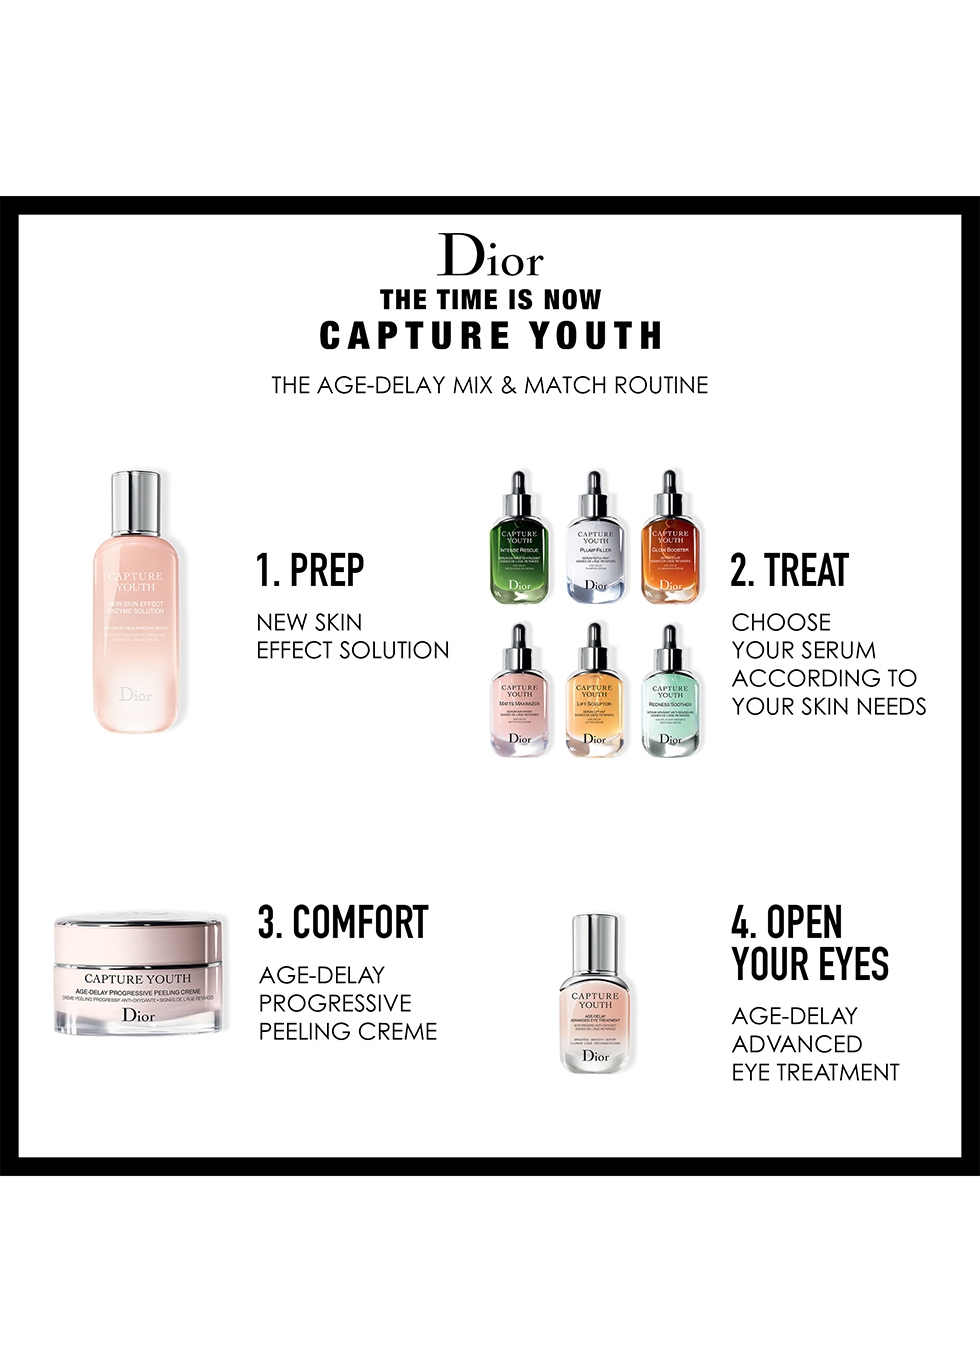 dior capture youth age delay advanced eye treatment reviews